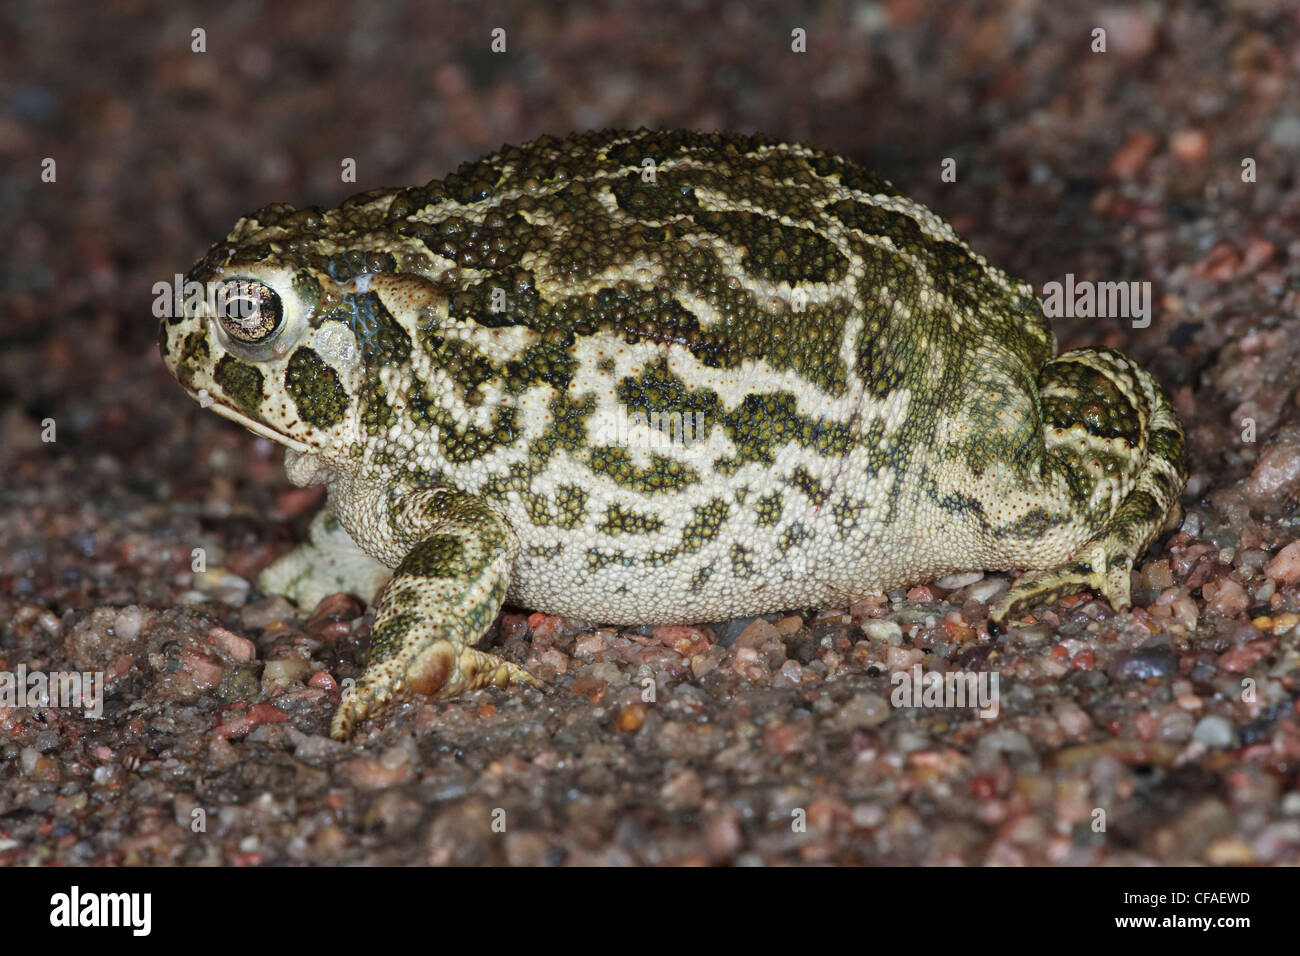 Great plains toad (Bufo cognatus), inflated defence posture, near Pawnee National Grassland, Colorado. Stock Photo